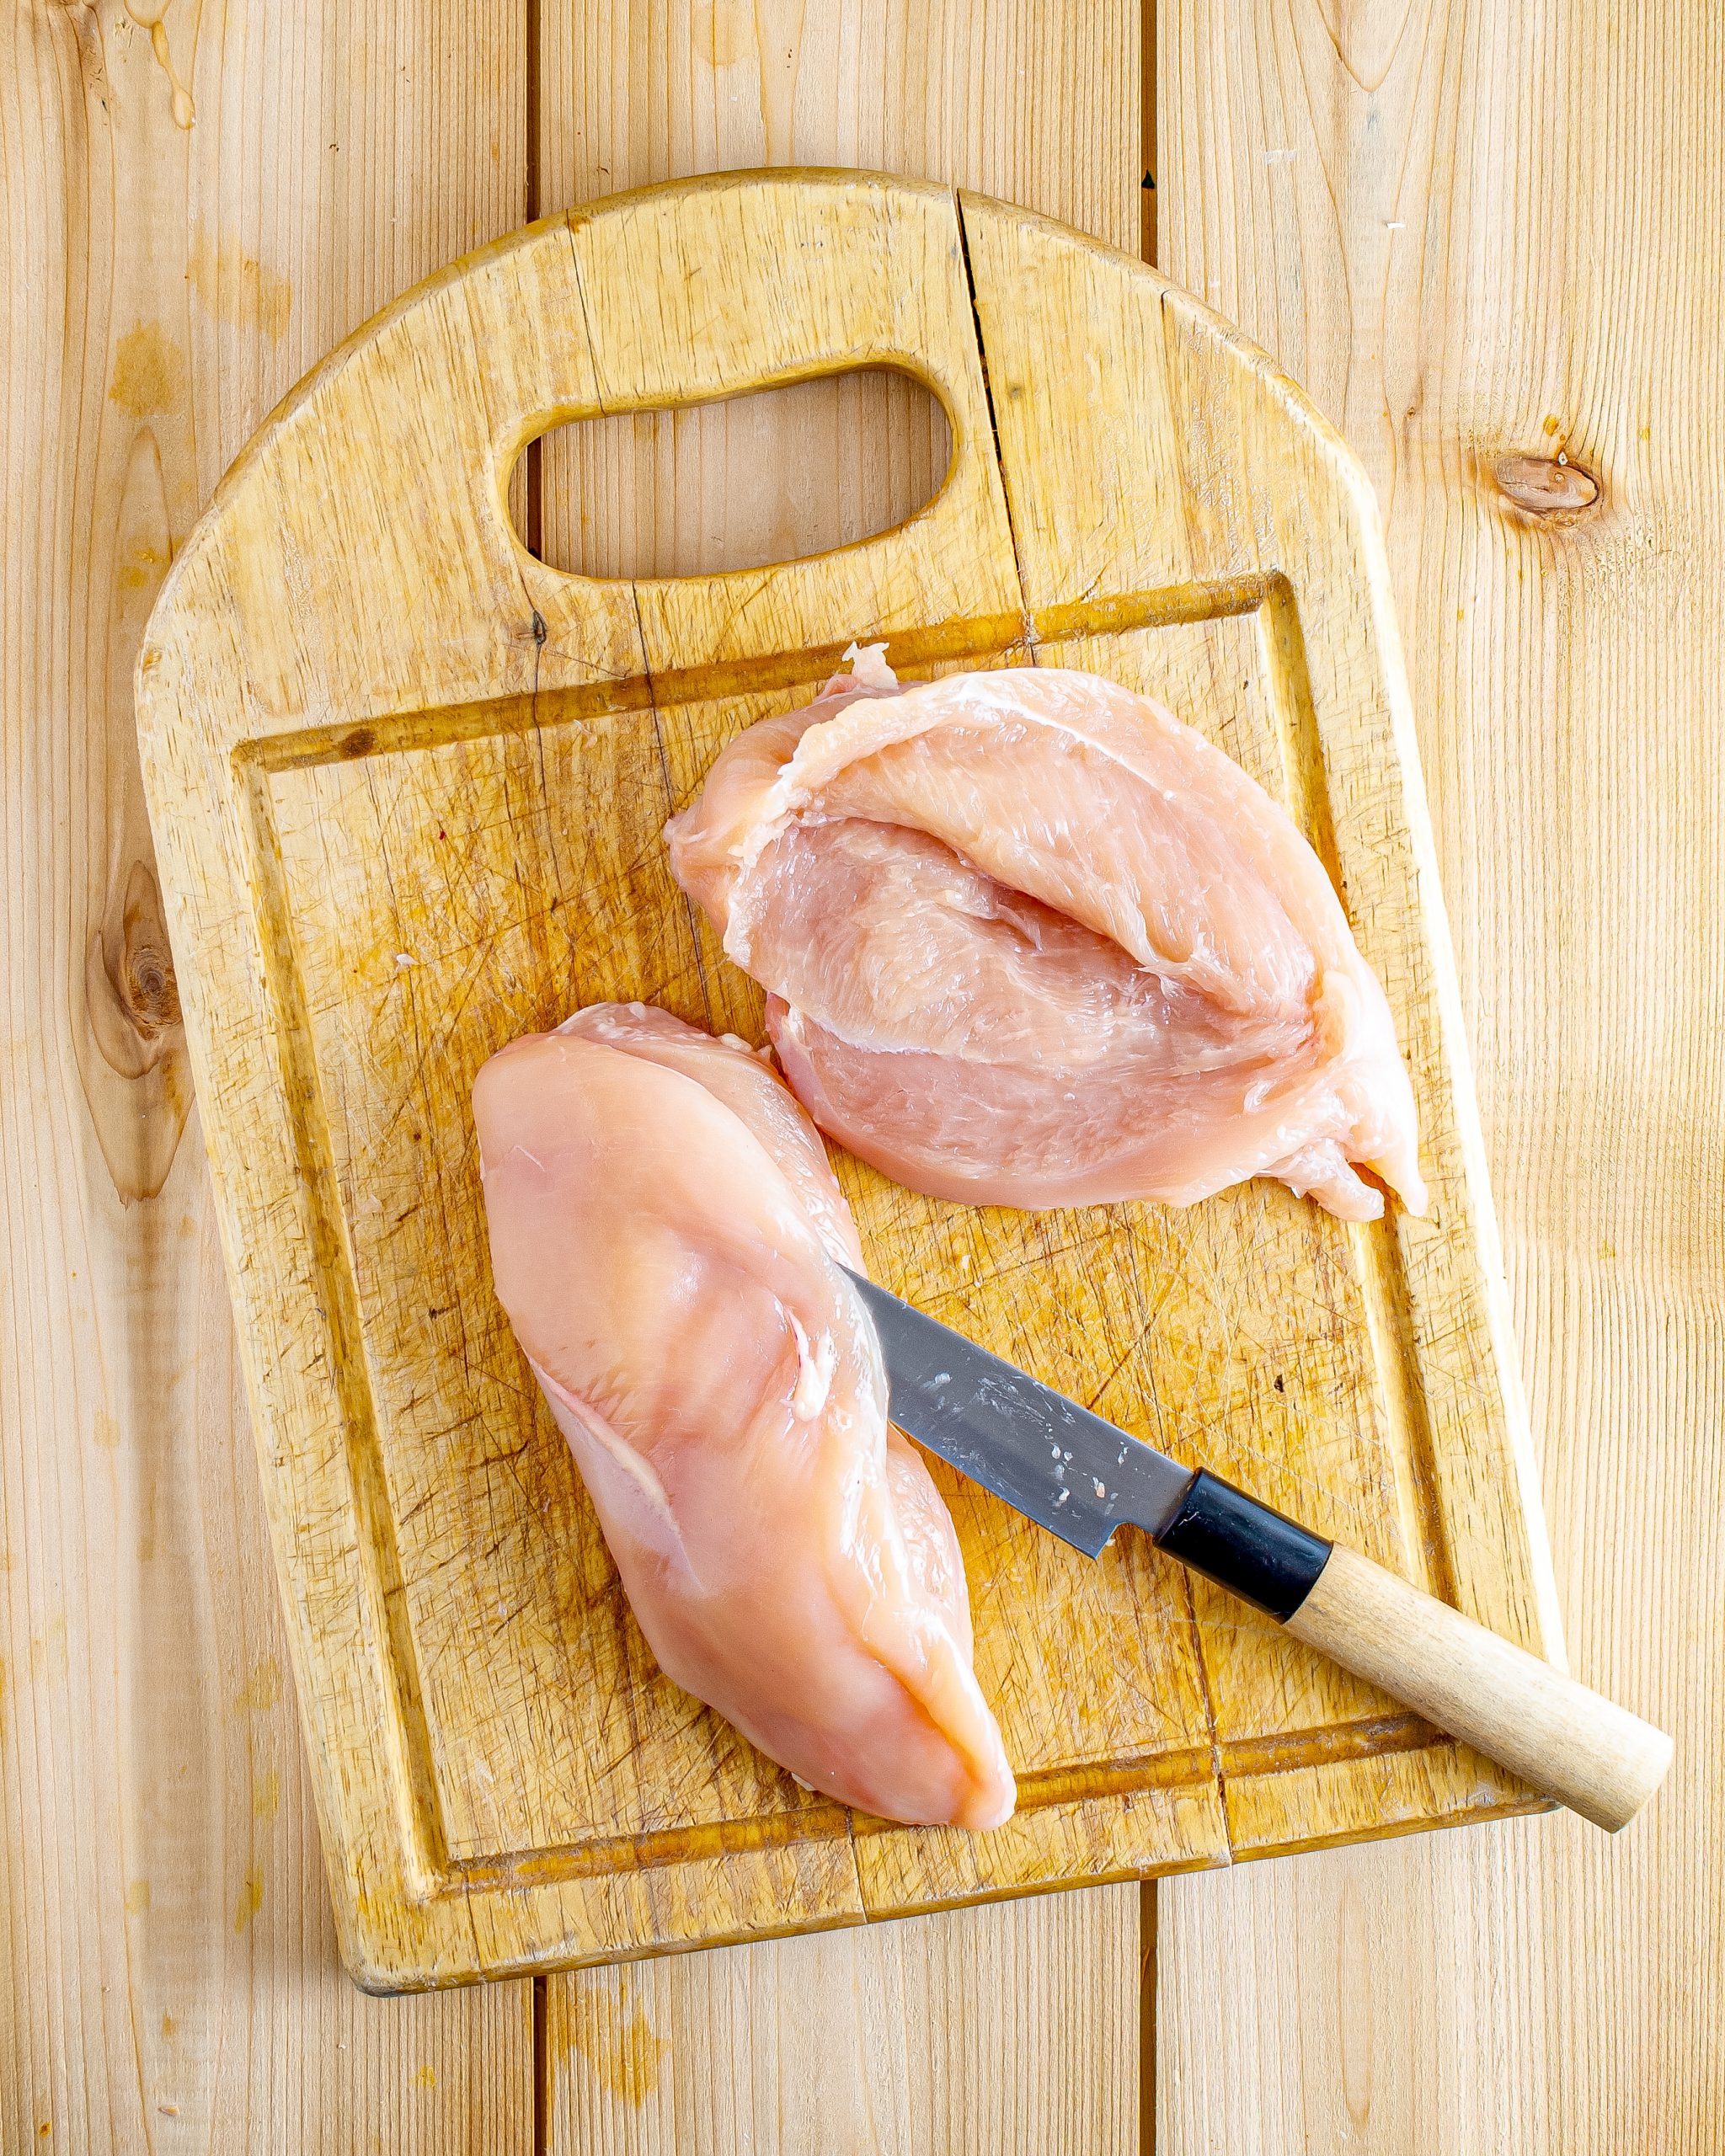 Slice the chicken vertically on the side to form a pocket in each breast. Be careful not to slice the chicken breast all the way through.